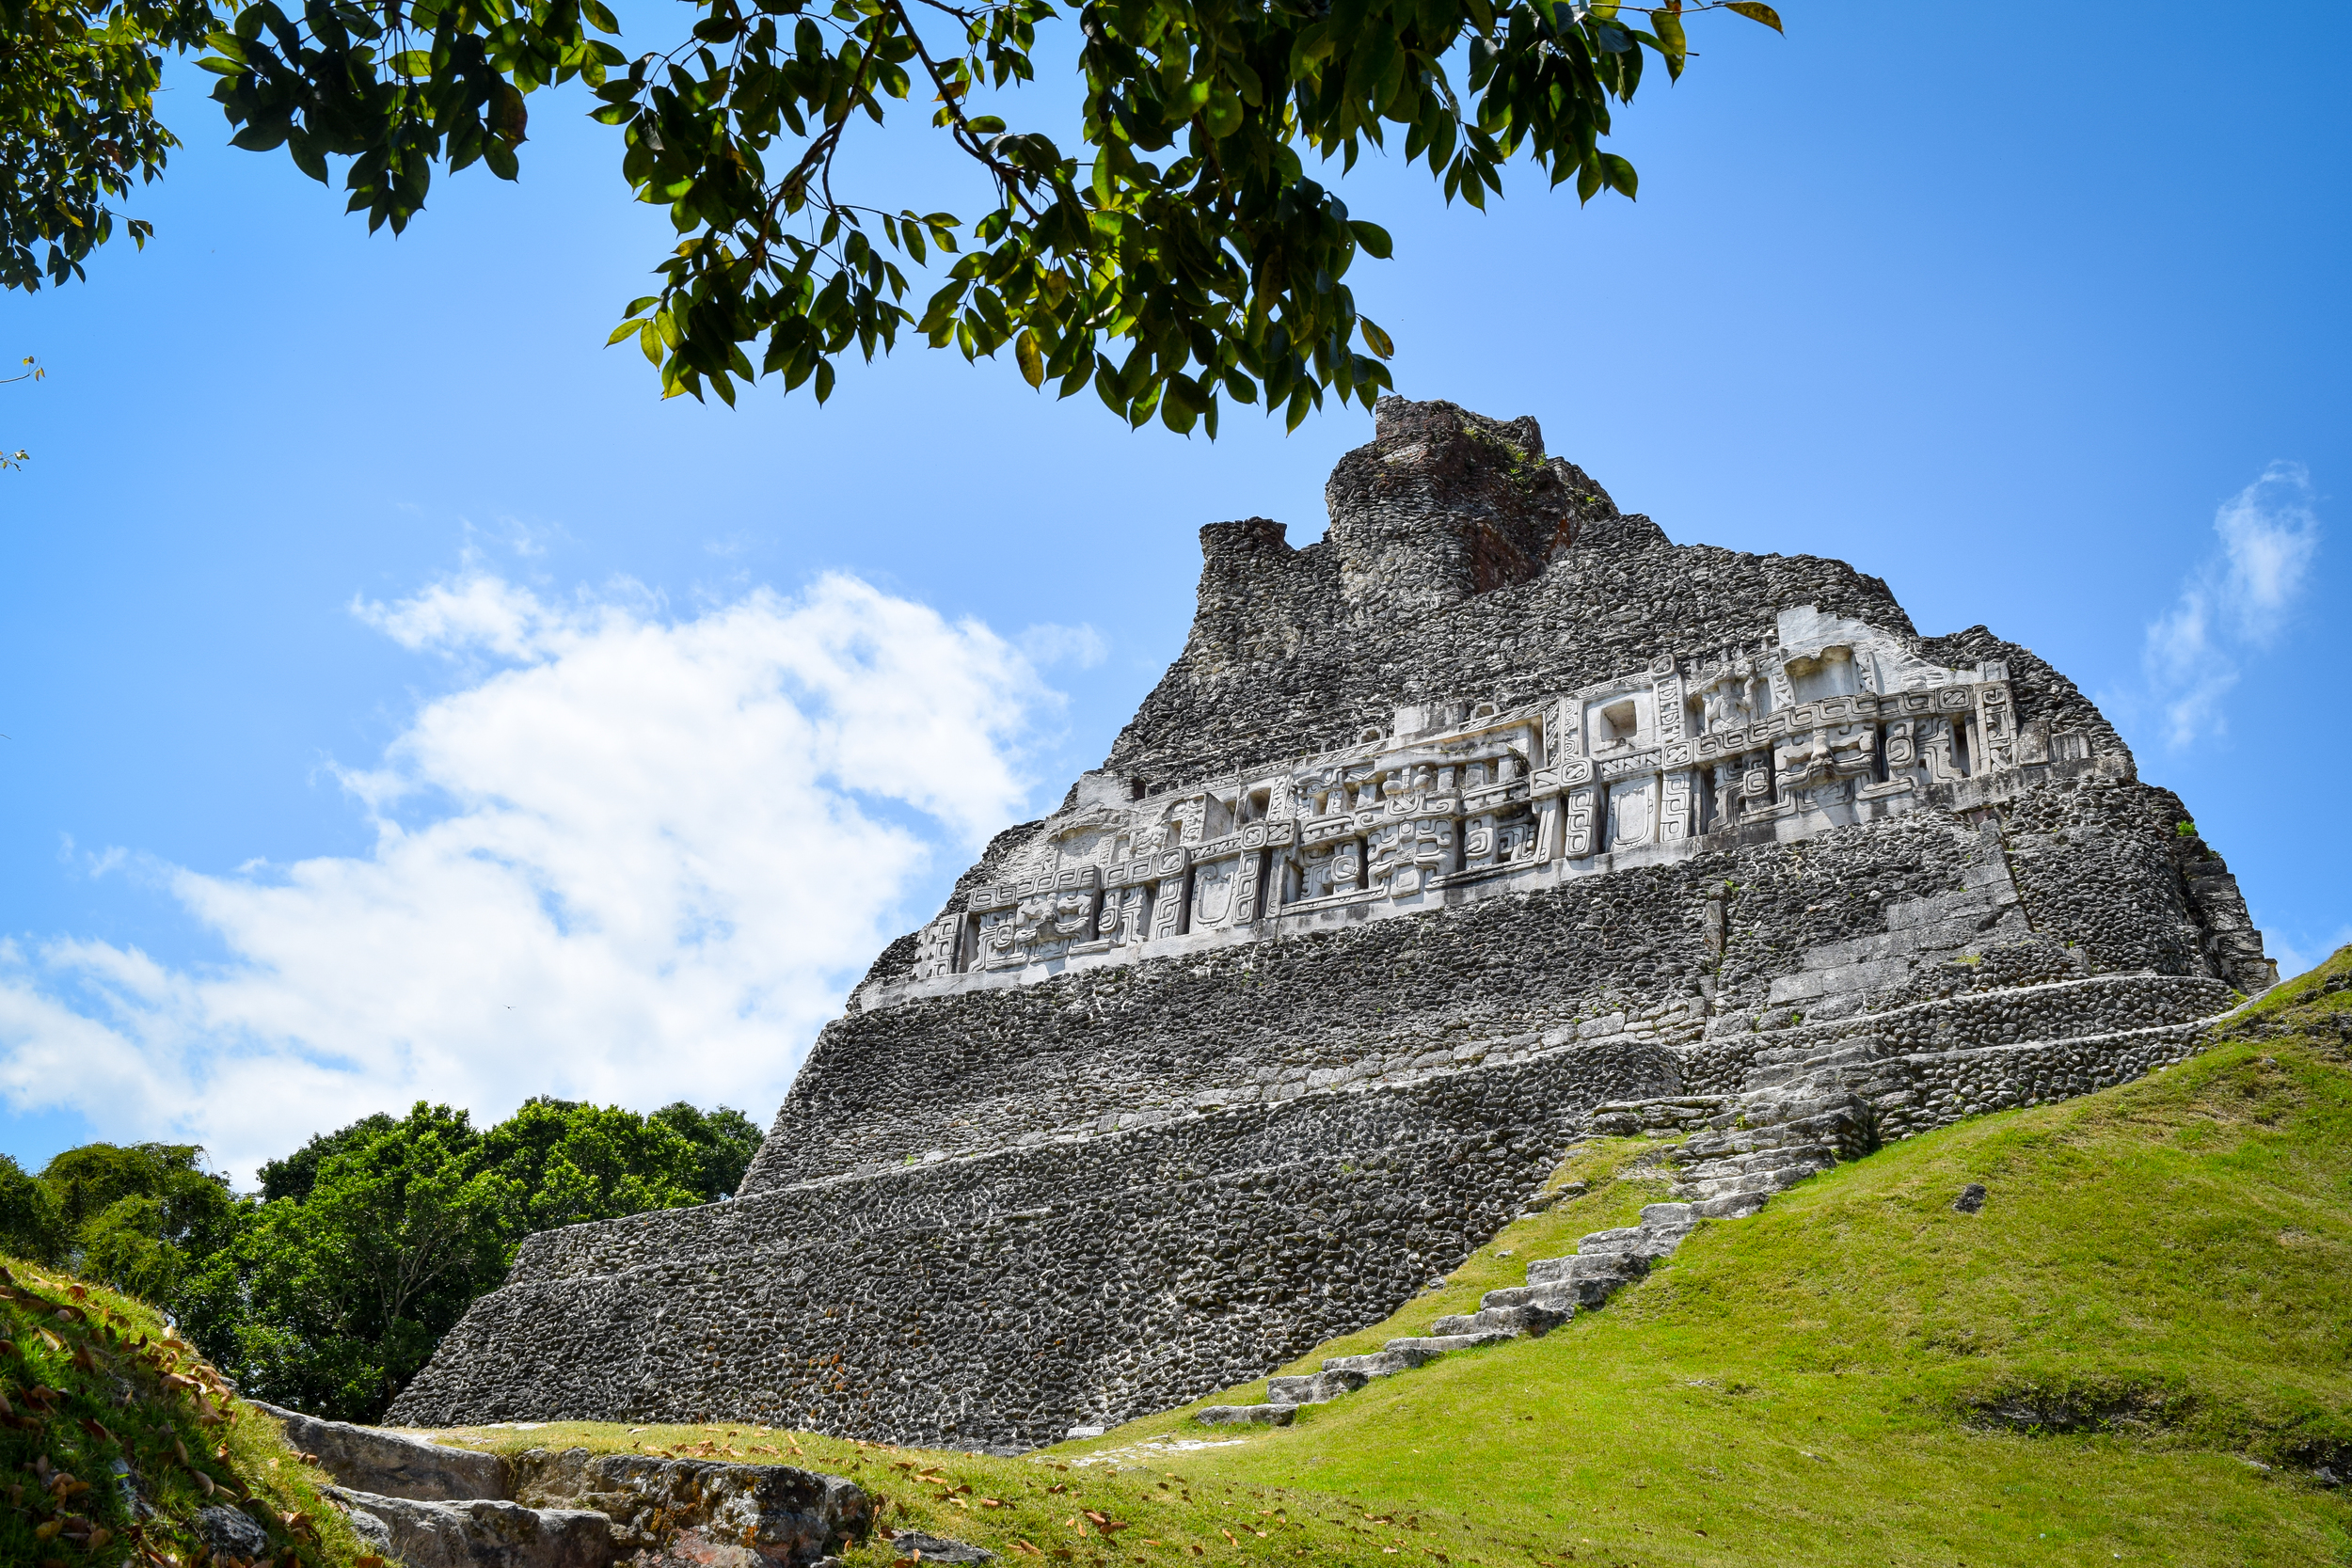 Stepping Back in Time at Xunantunich